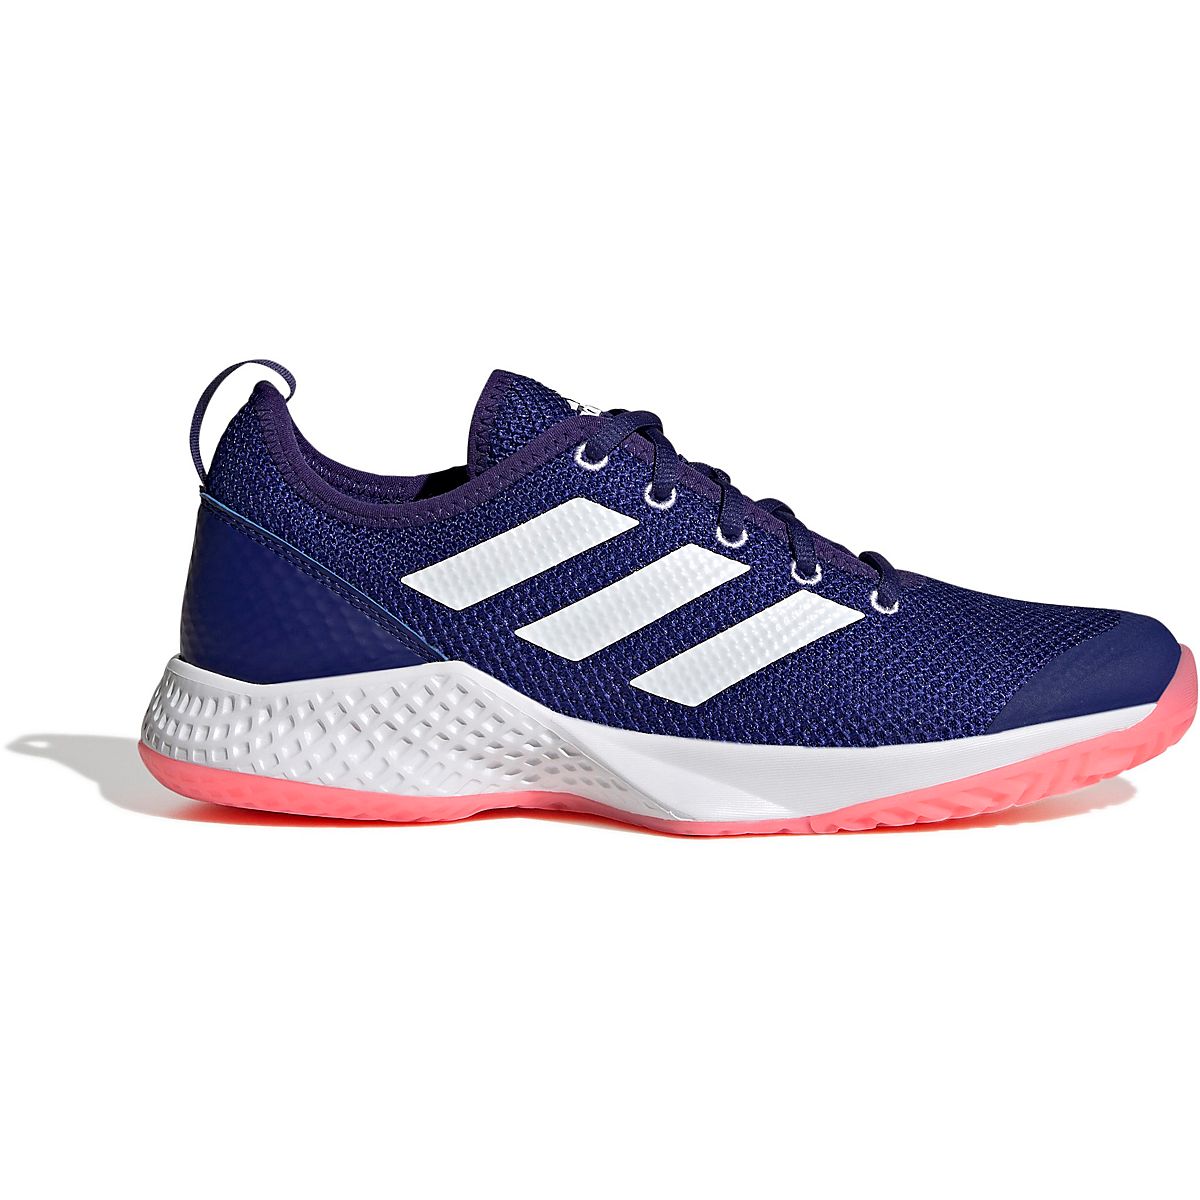 adidas Women's CourtFlash Tennis Shoes | Free Shipping at Academy